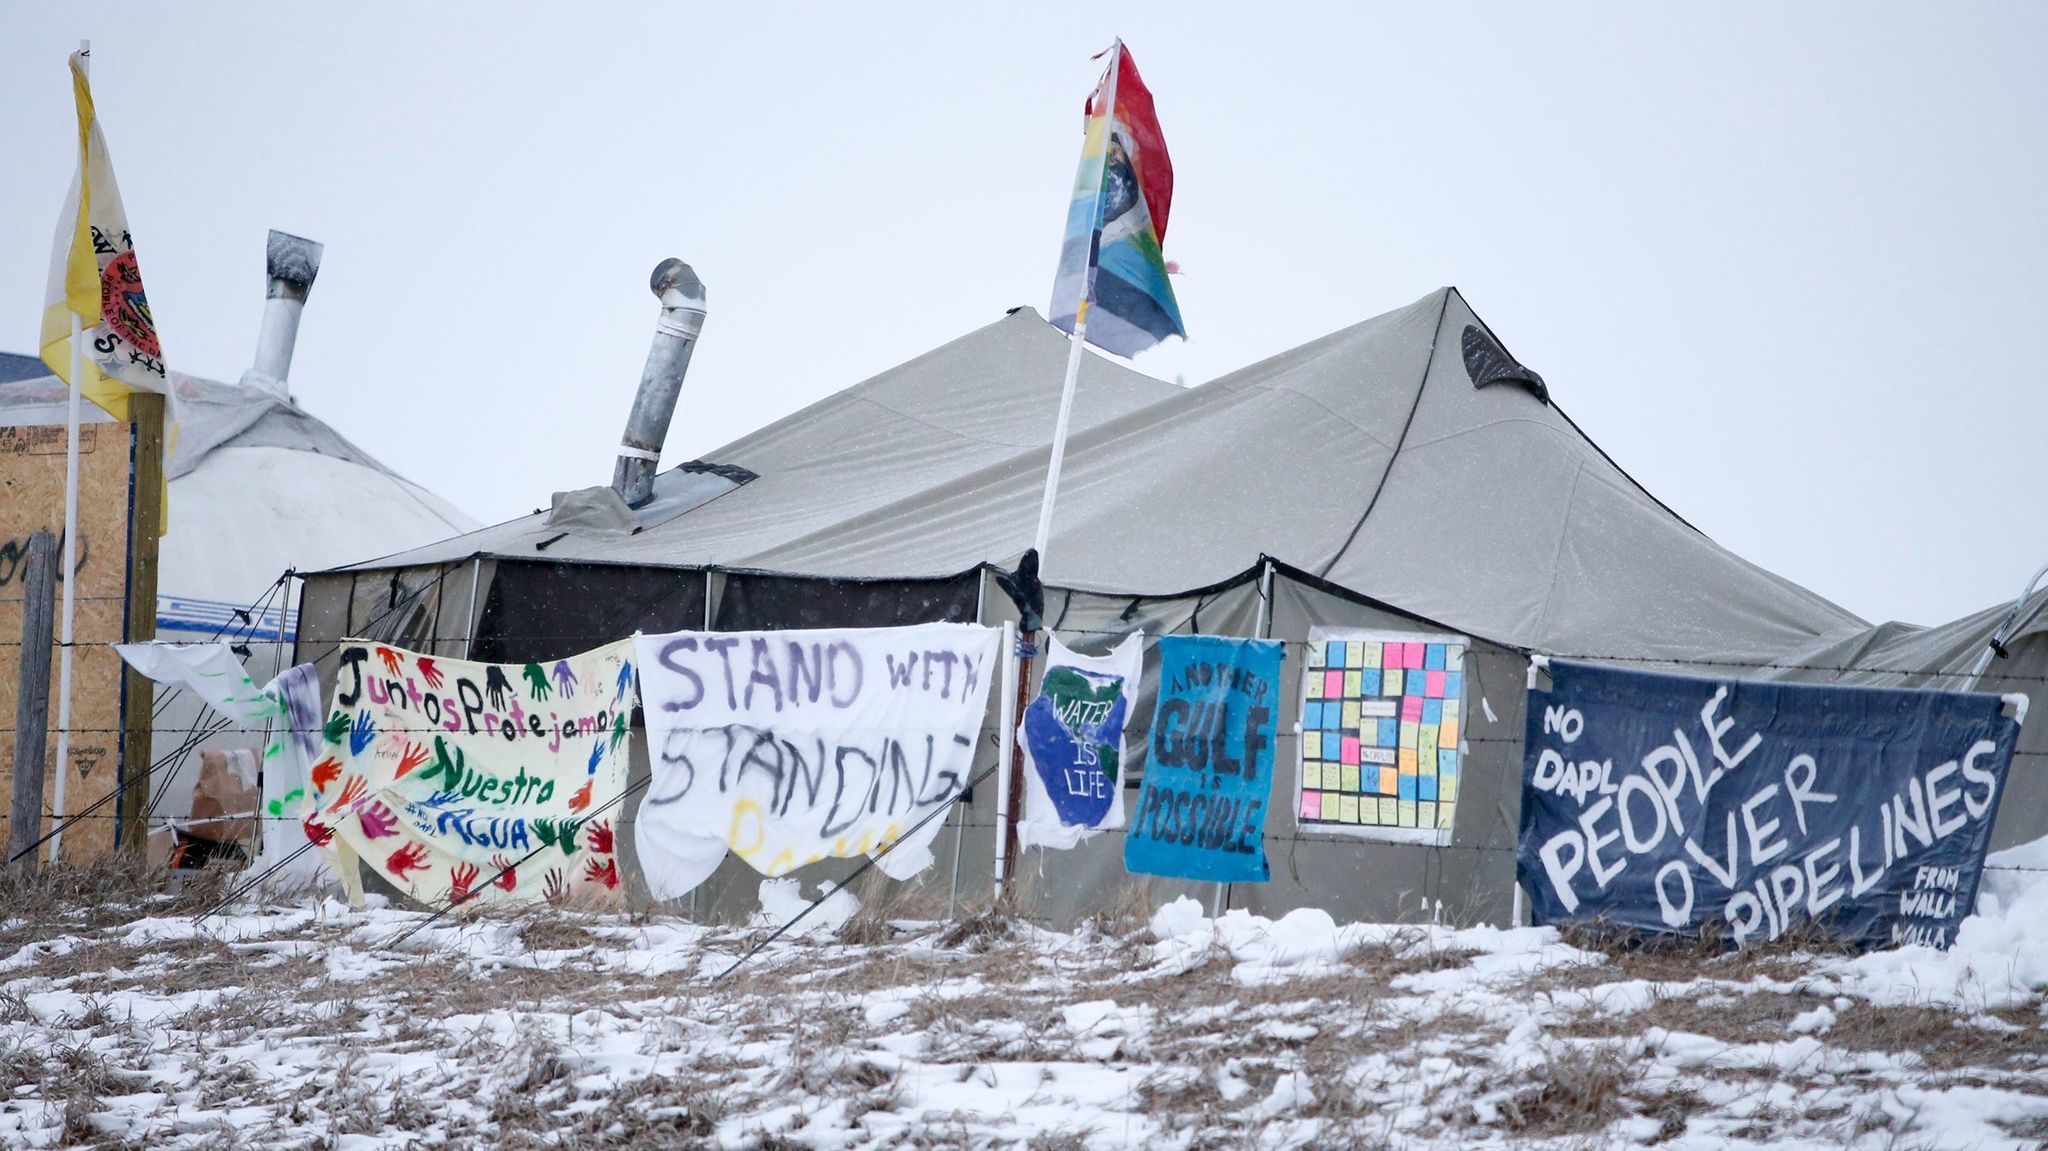   Dakota Access Pipeline "title =" Dakota Access Pipeline "/> 
 
<figcaption> Oceti Sakowin camp last year at the edge of the Cannonball River in North Dakota, north of the Standing Rock Sioux Preserve. <span clbad=